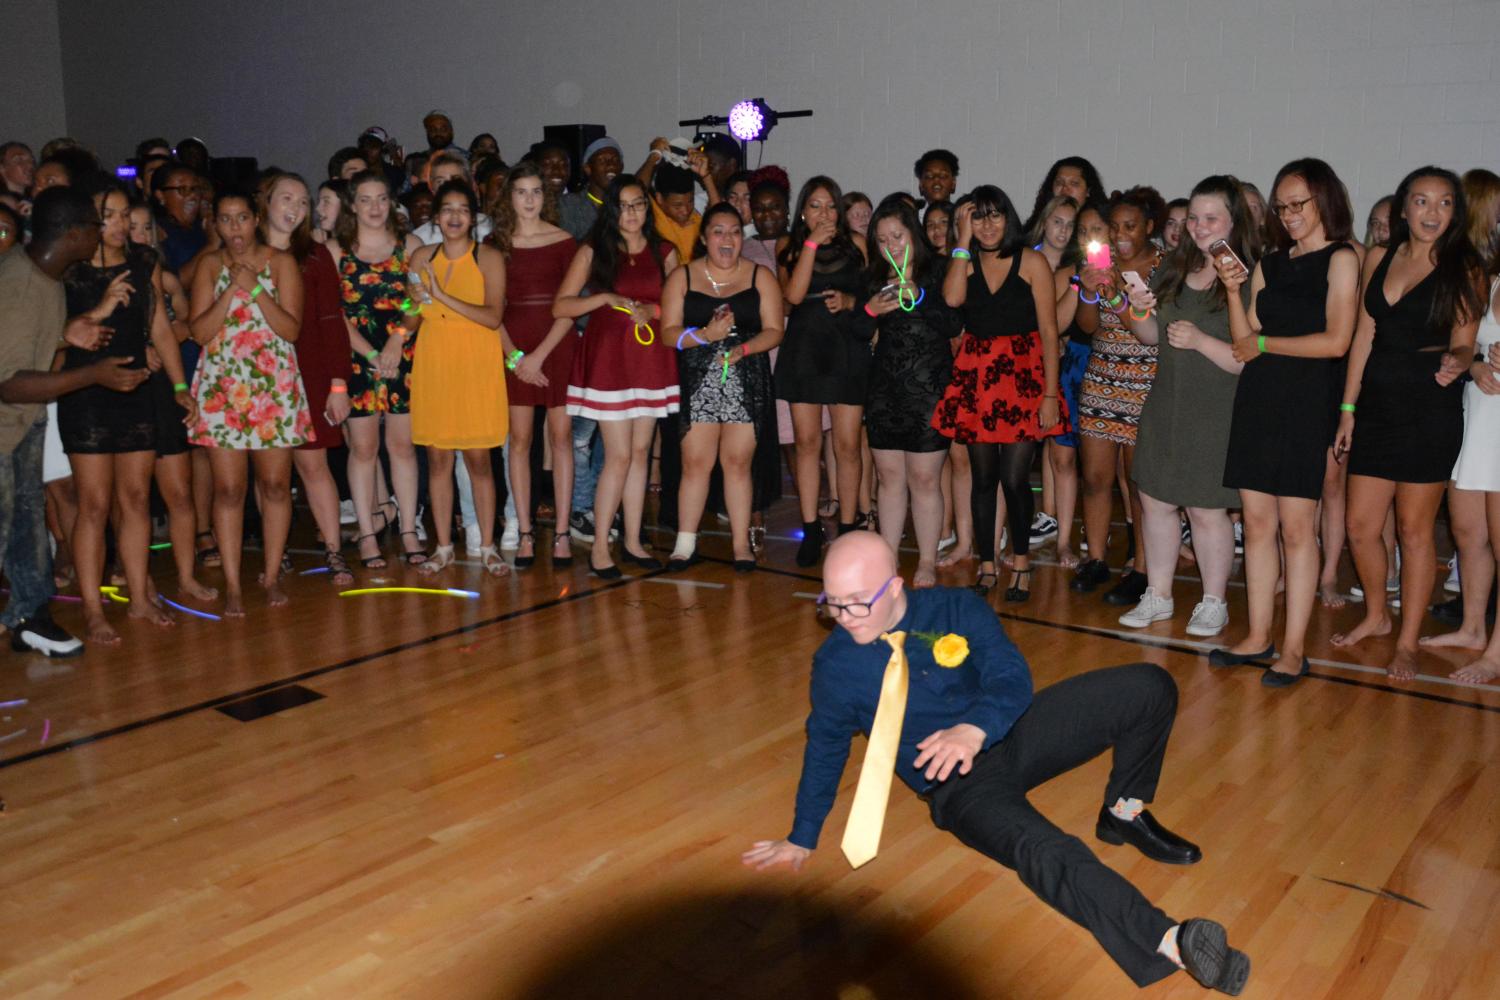 Homecoming king Terrance OBrien breakdances during the homecoming dance, Sept. 16.